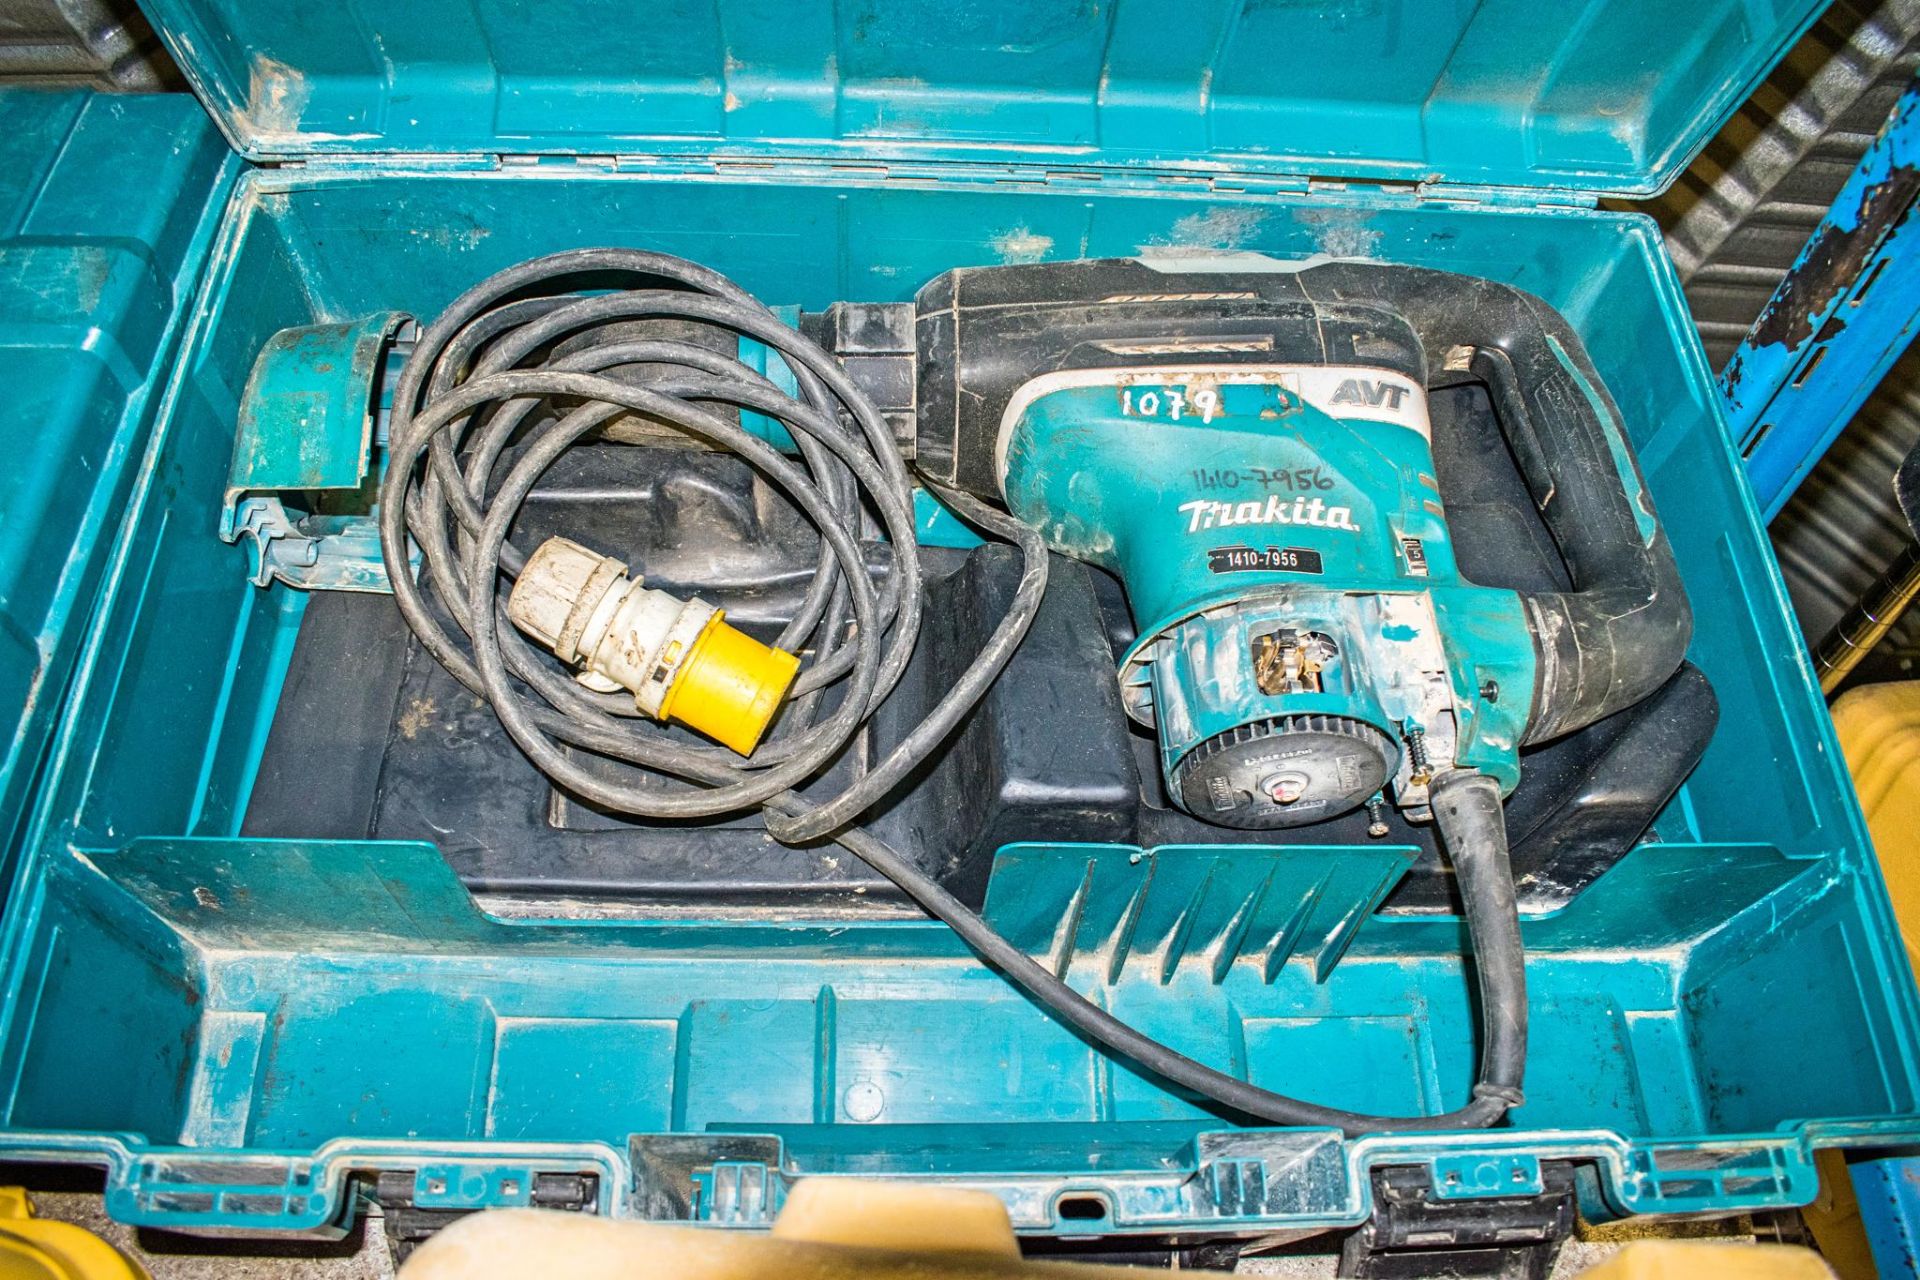 Makita 110v SDS rotary hammer drill c/w carry case ** Parts missing **